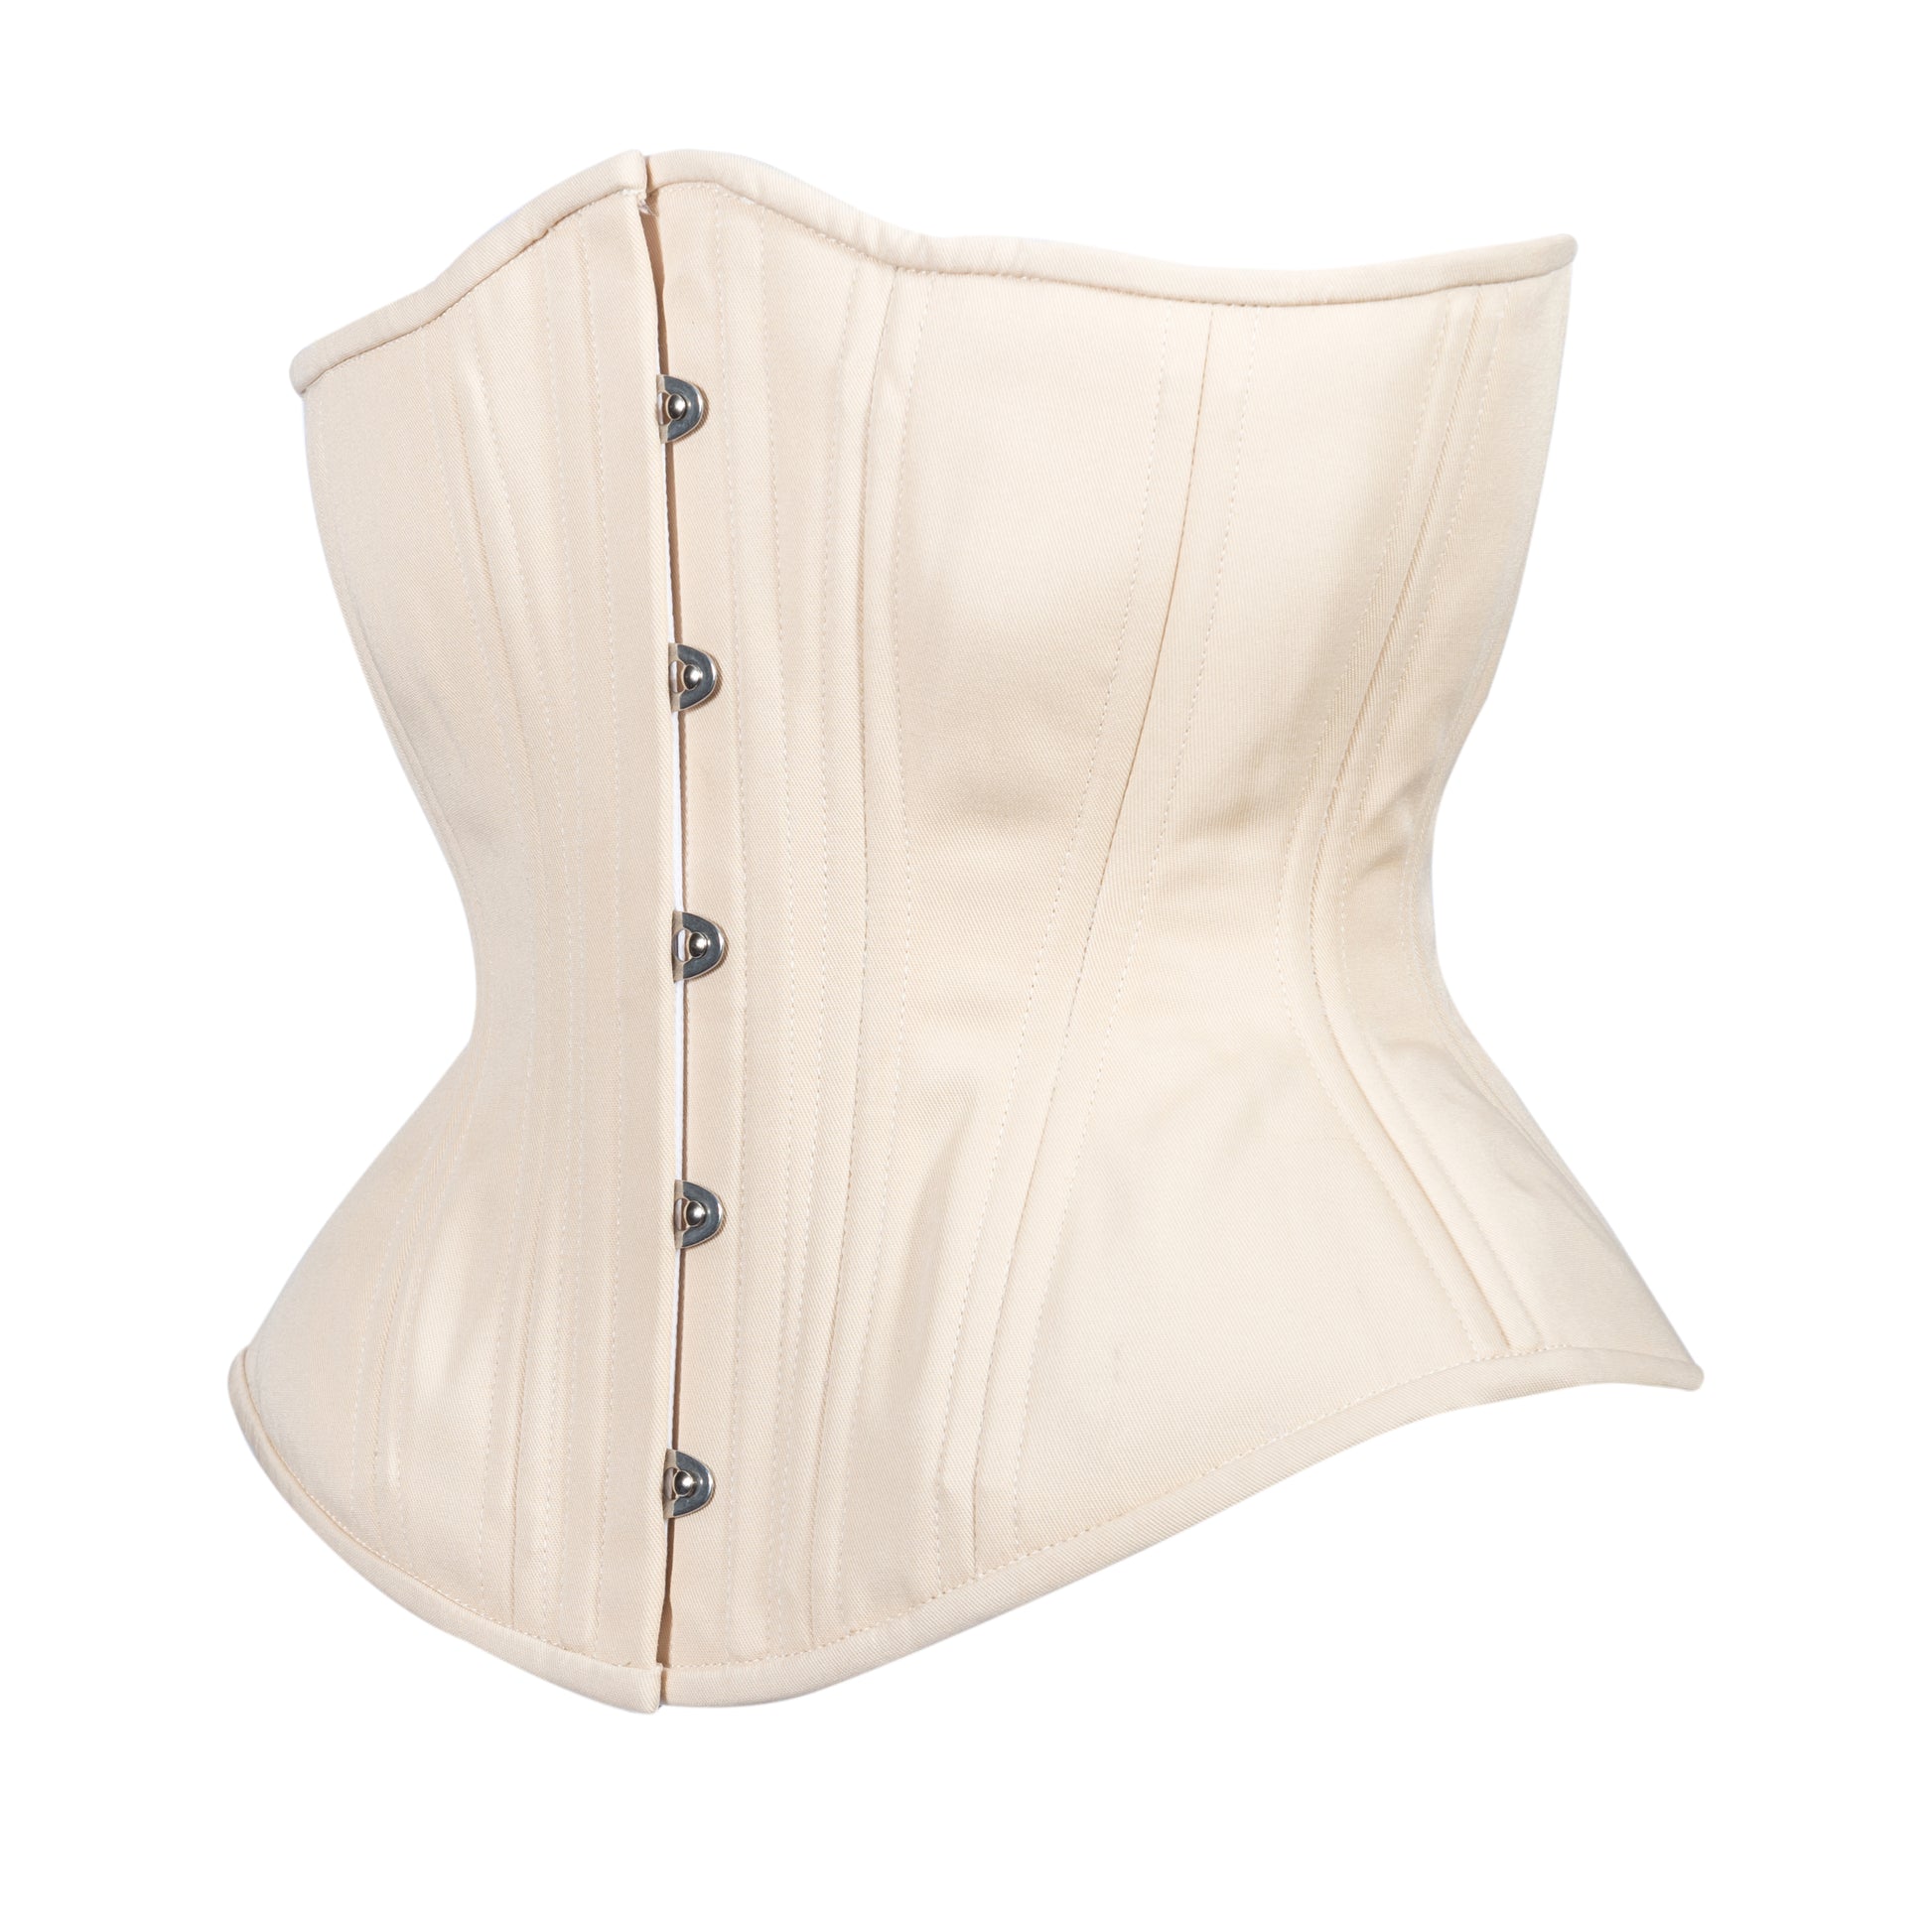 The Best Stealthing Corsets: Choosing the Perfect Material, Color